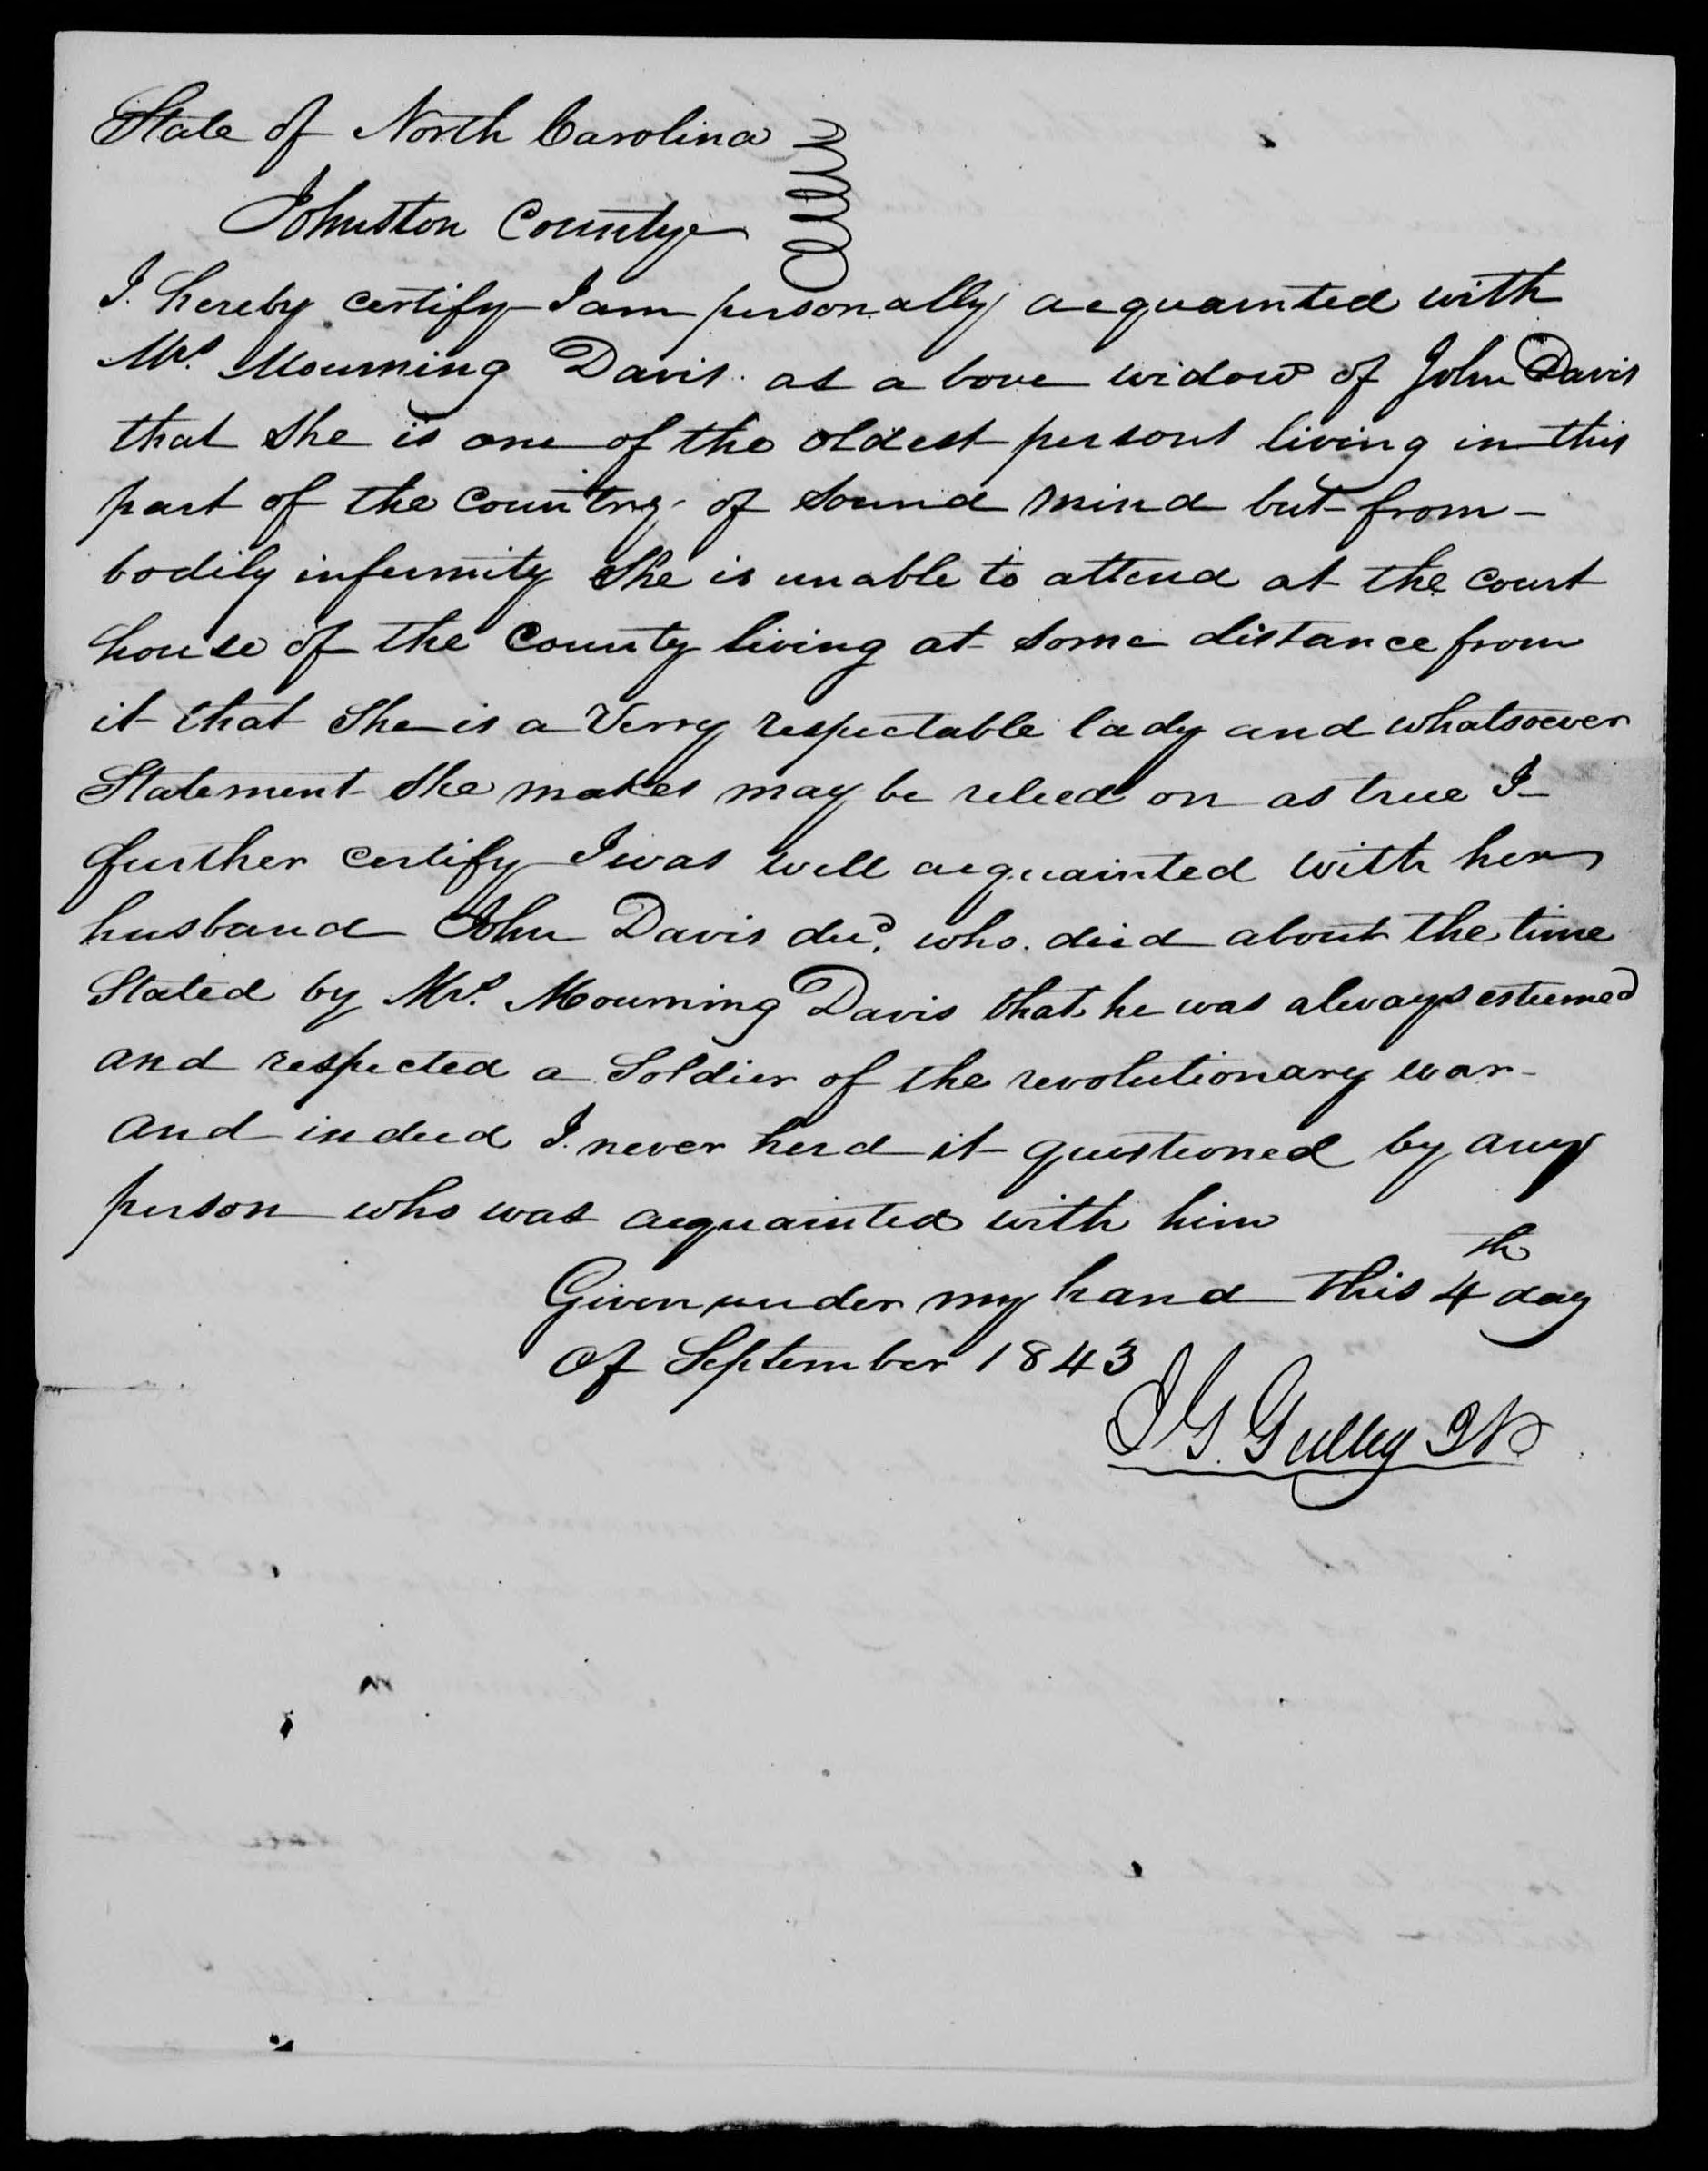 Application for a Widow's Pension from Mourning Davis, 4 September 1843, page 2